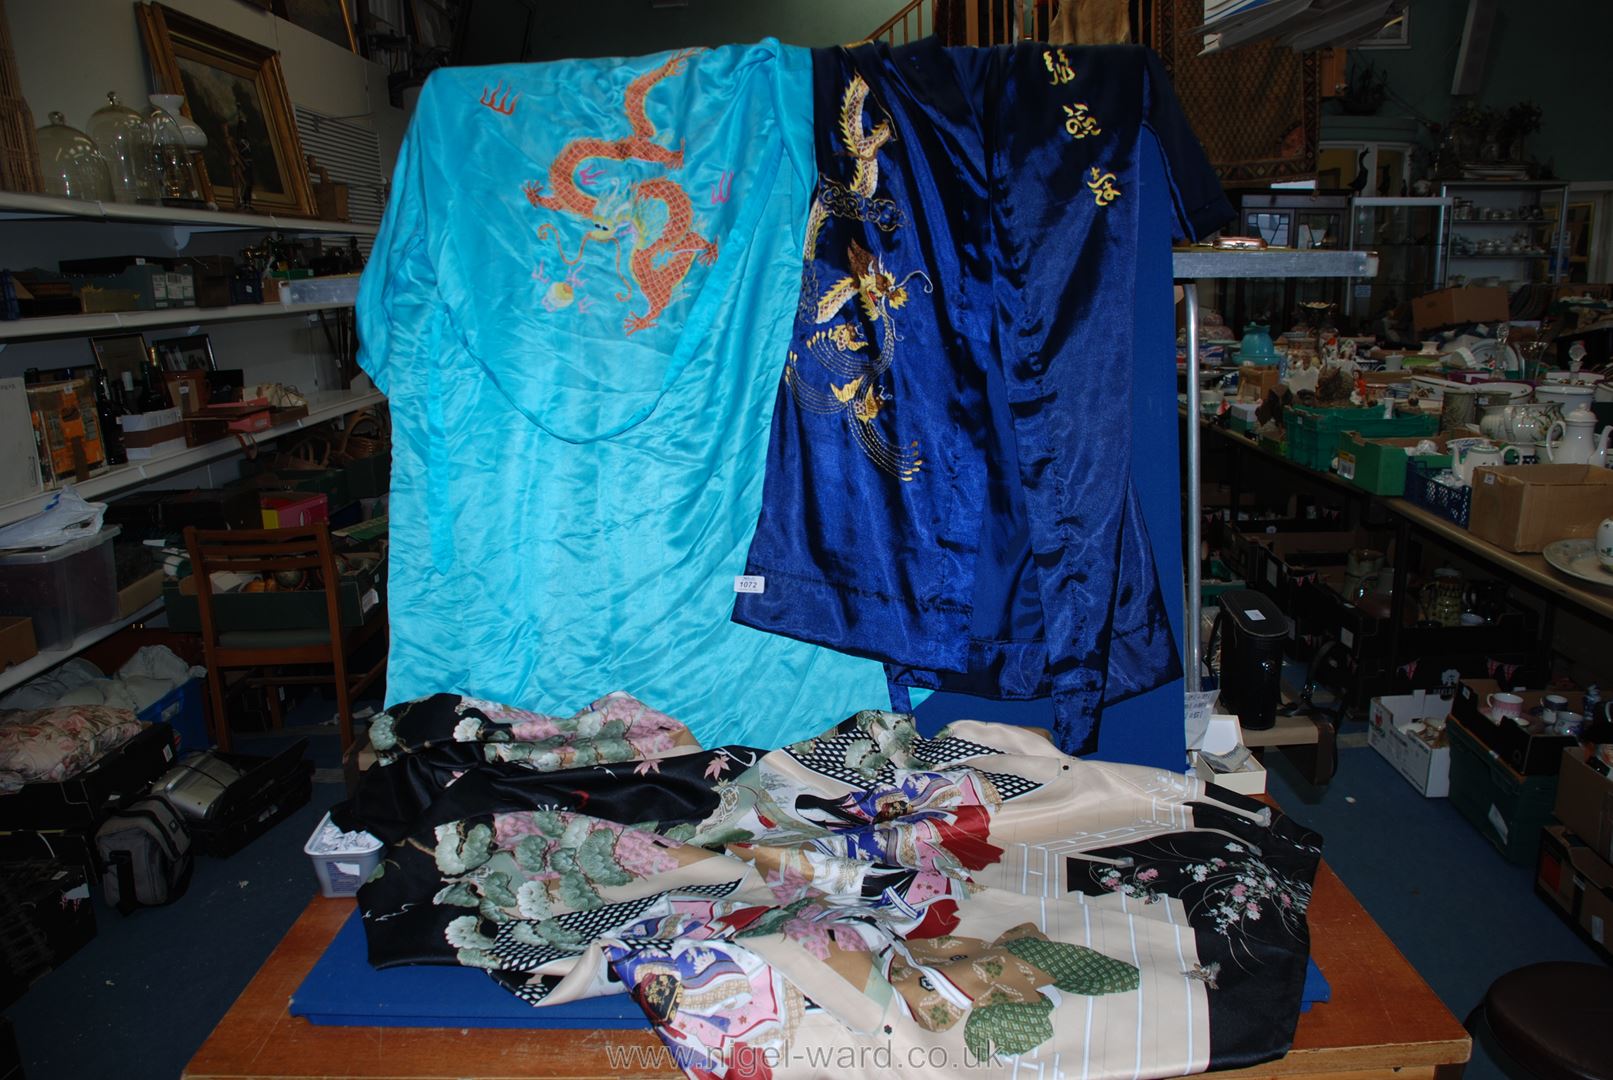 Three Kimonos, one navy, one black and one turquoise, two having hand embroidery.